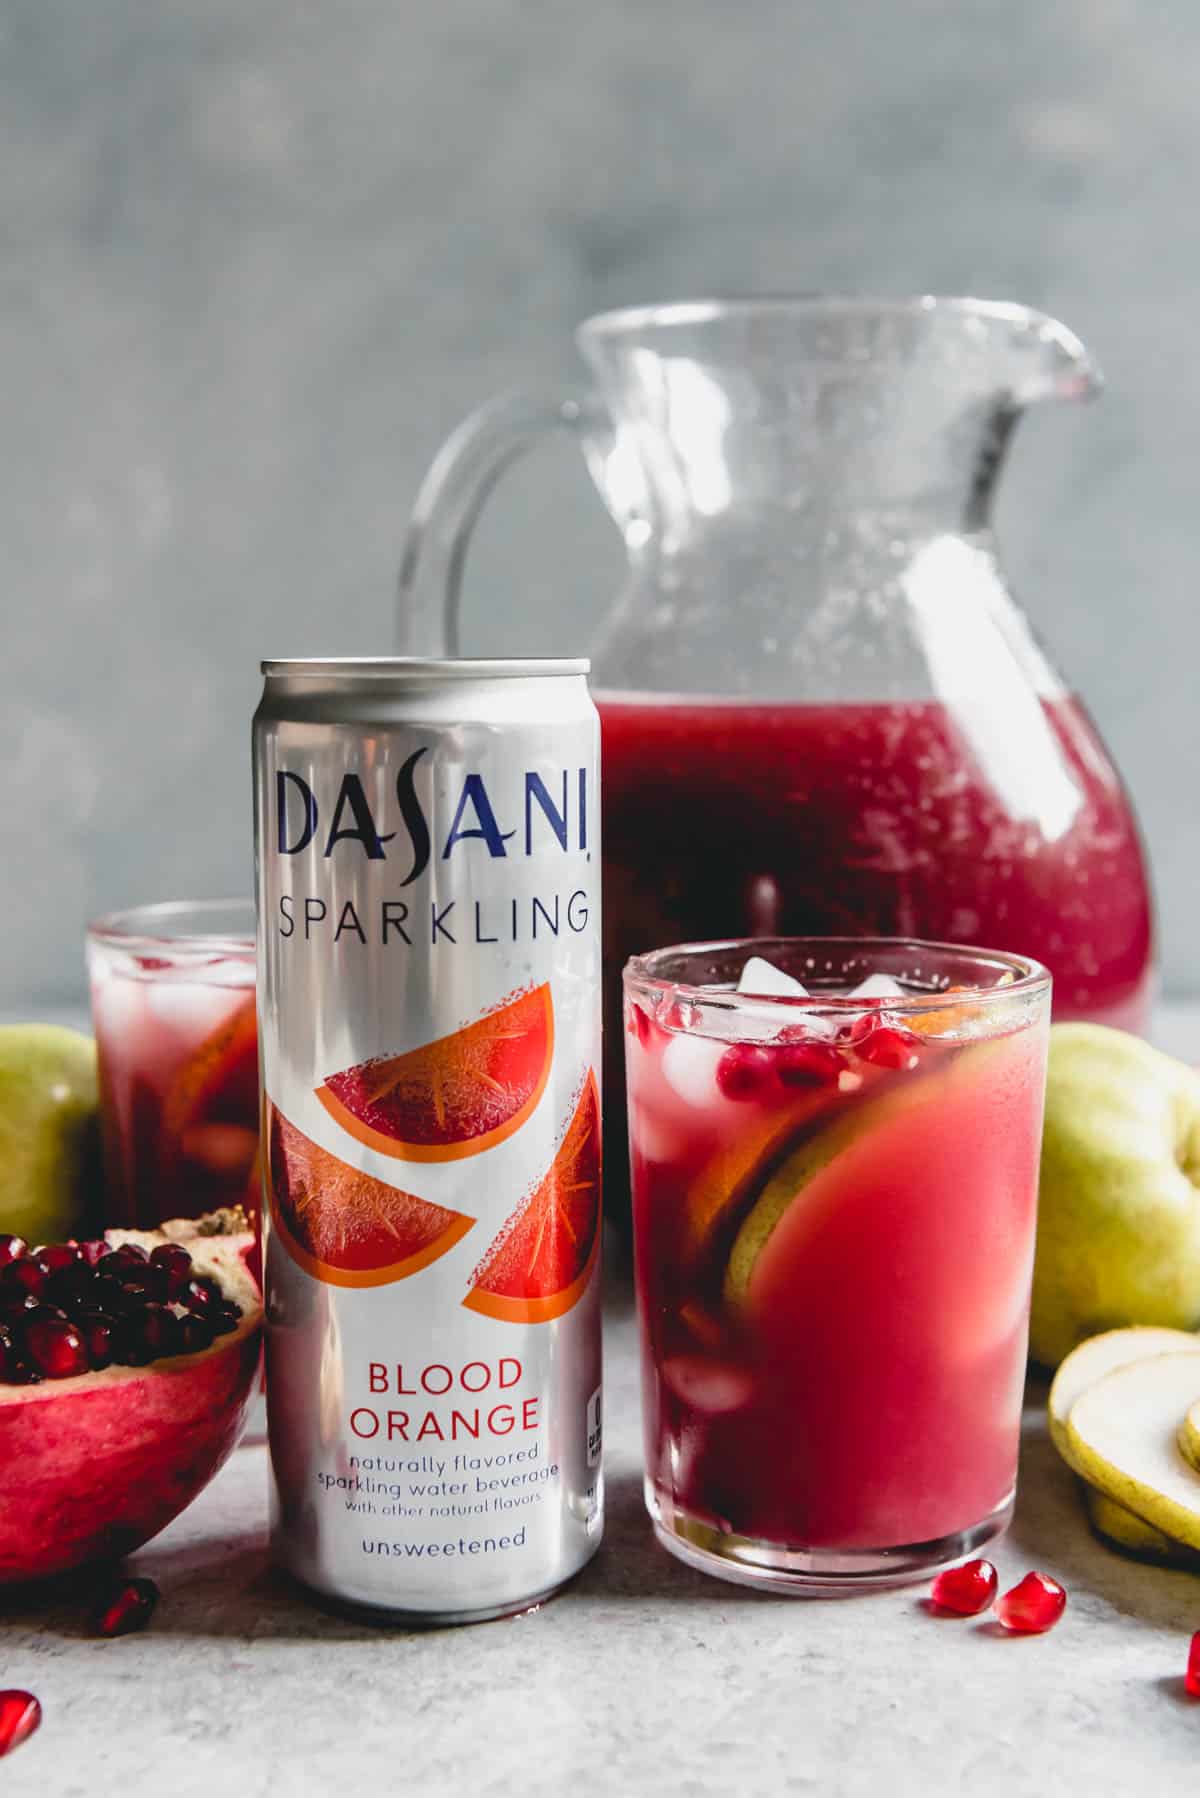 An image of a can of DASANI Sparkling Blood Orange flavored water beside a glass of Pomegranate in a Pear Tree Punch made with the flavors of blood oranges, pomegranate juice, and pear juice, then garnished with fruit.